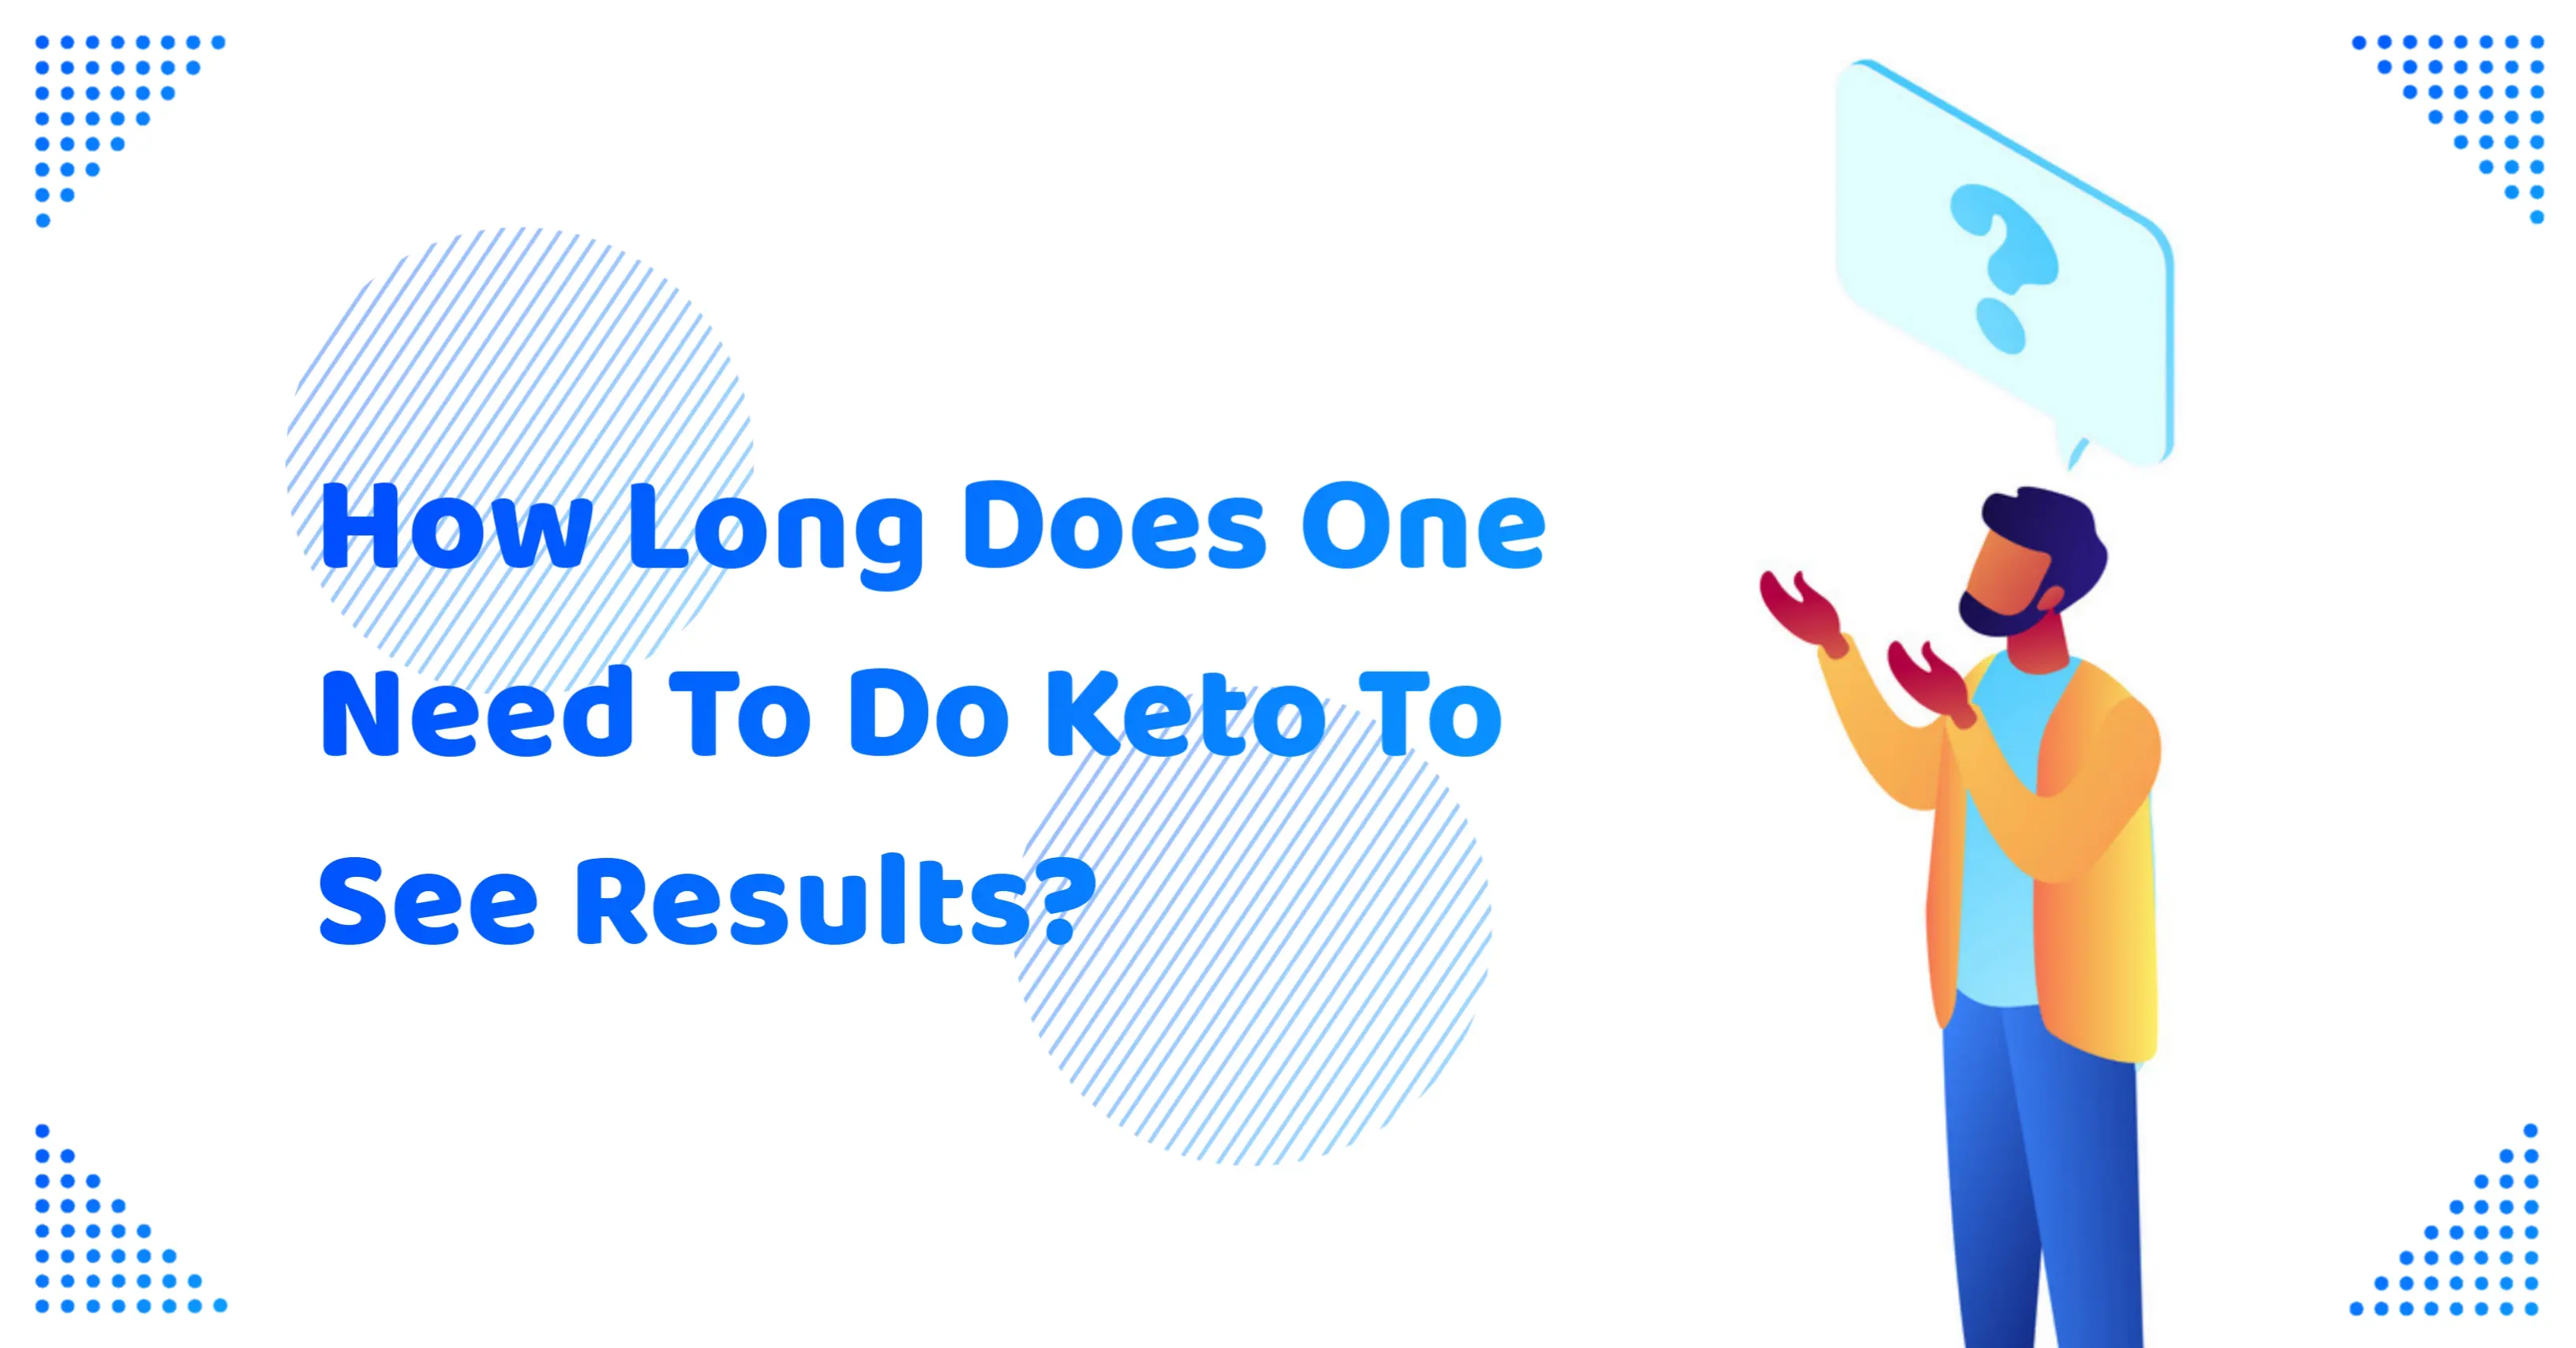 How Long Does One Need To Do Keto To See Results?